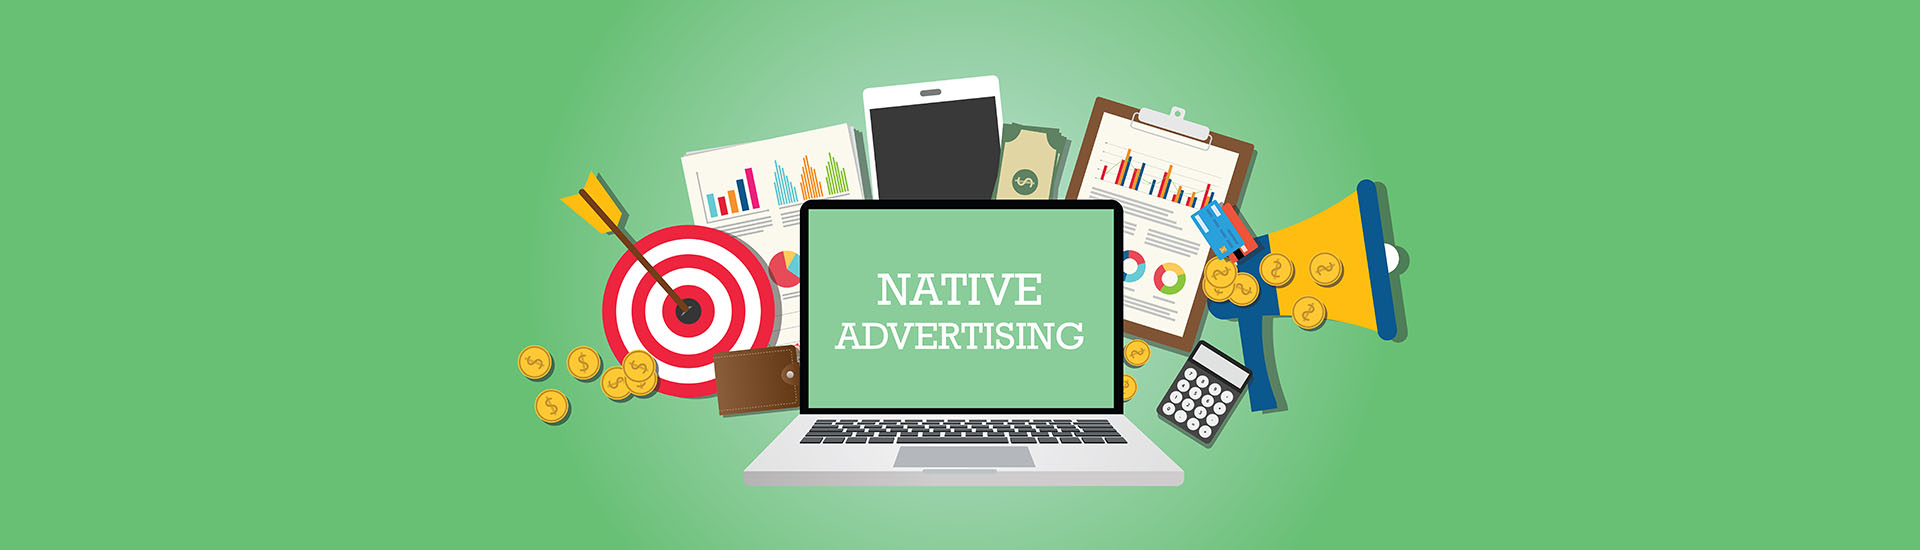 What is Native Advertising and why it is important for your business